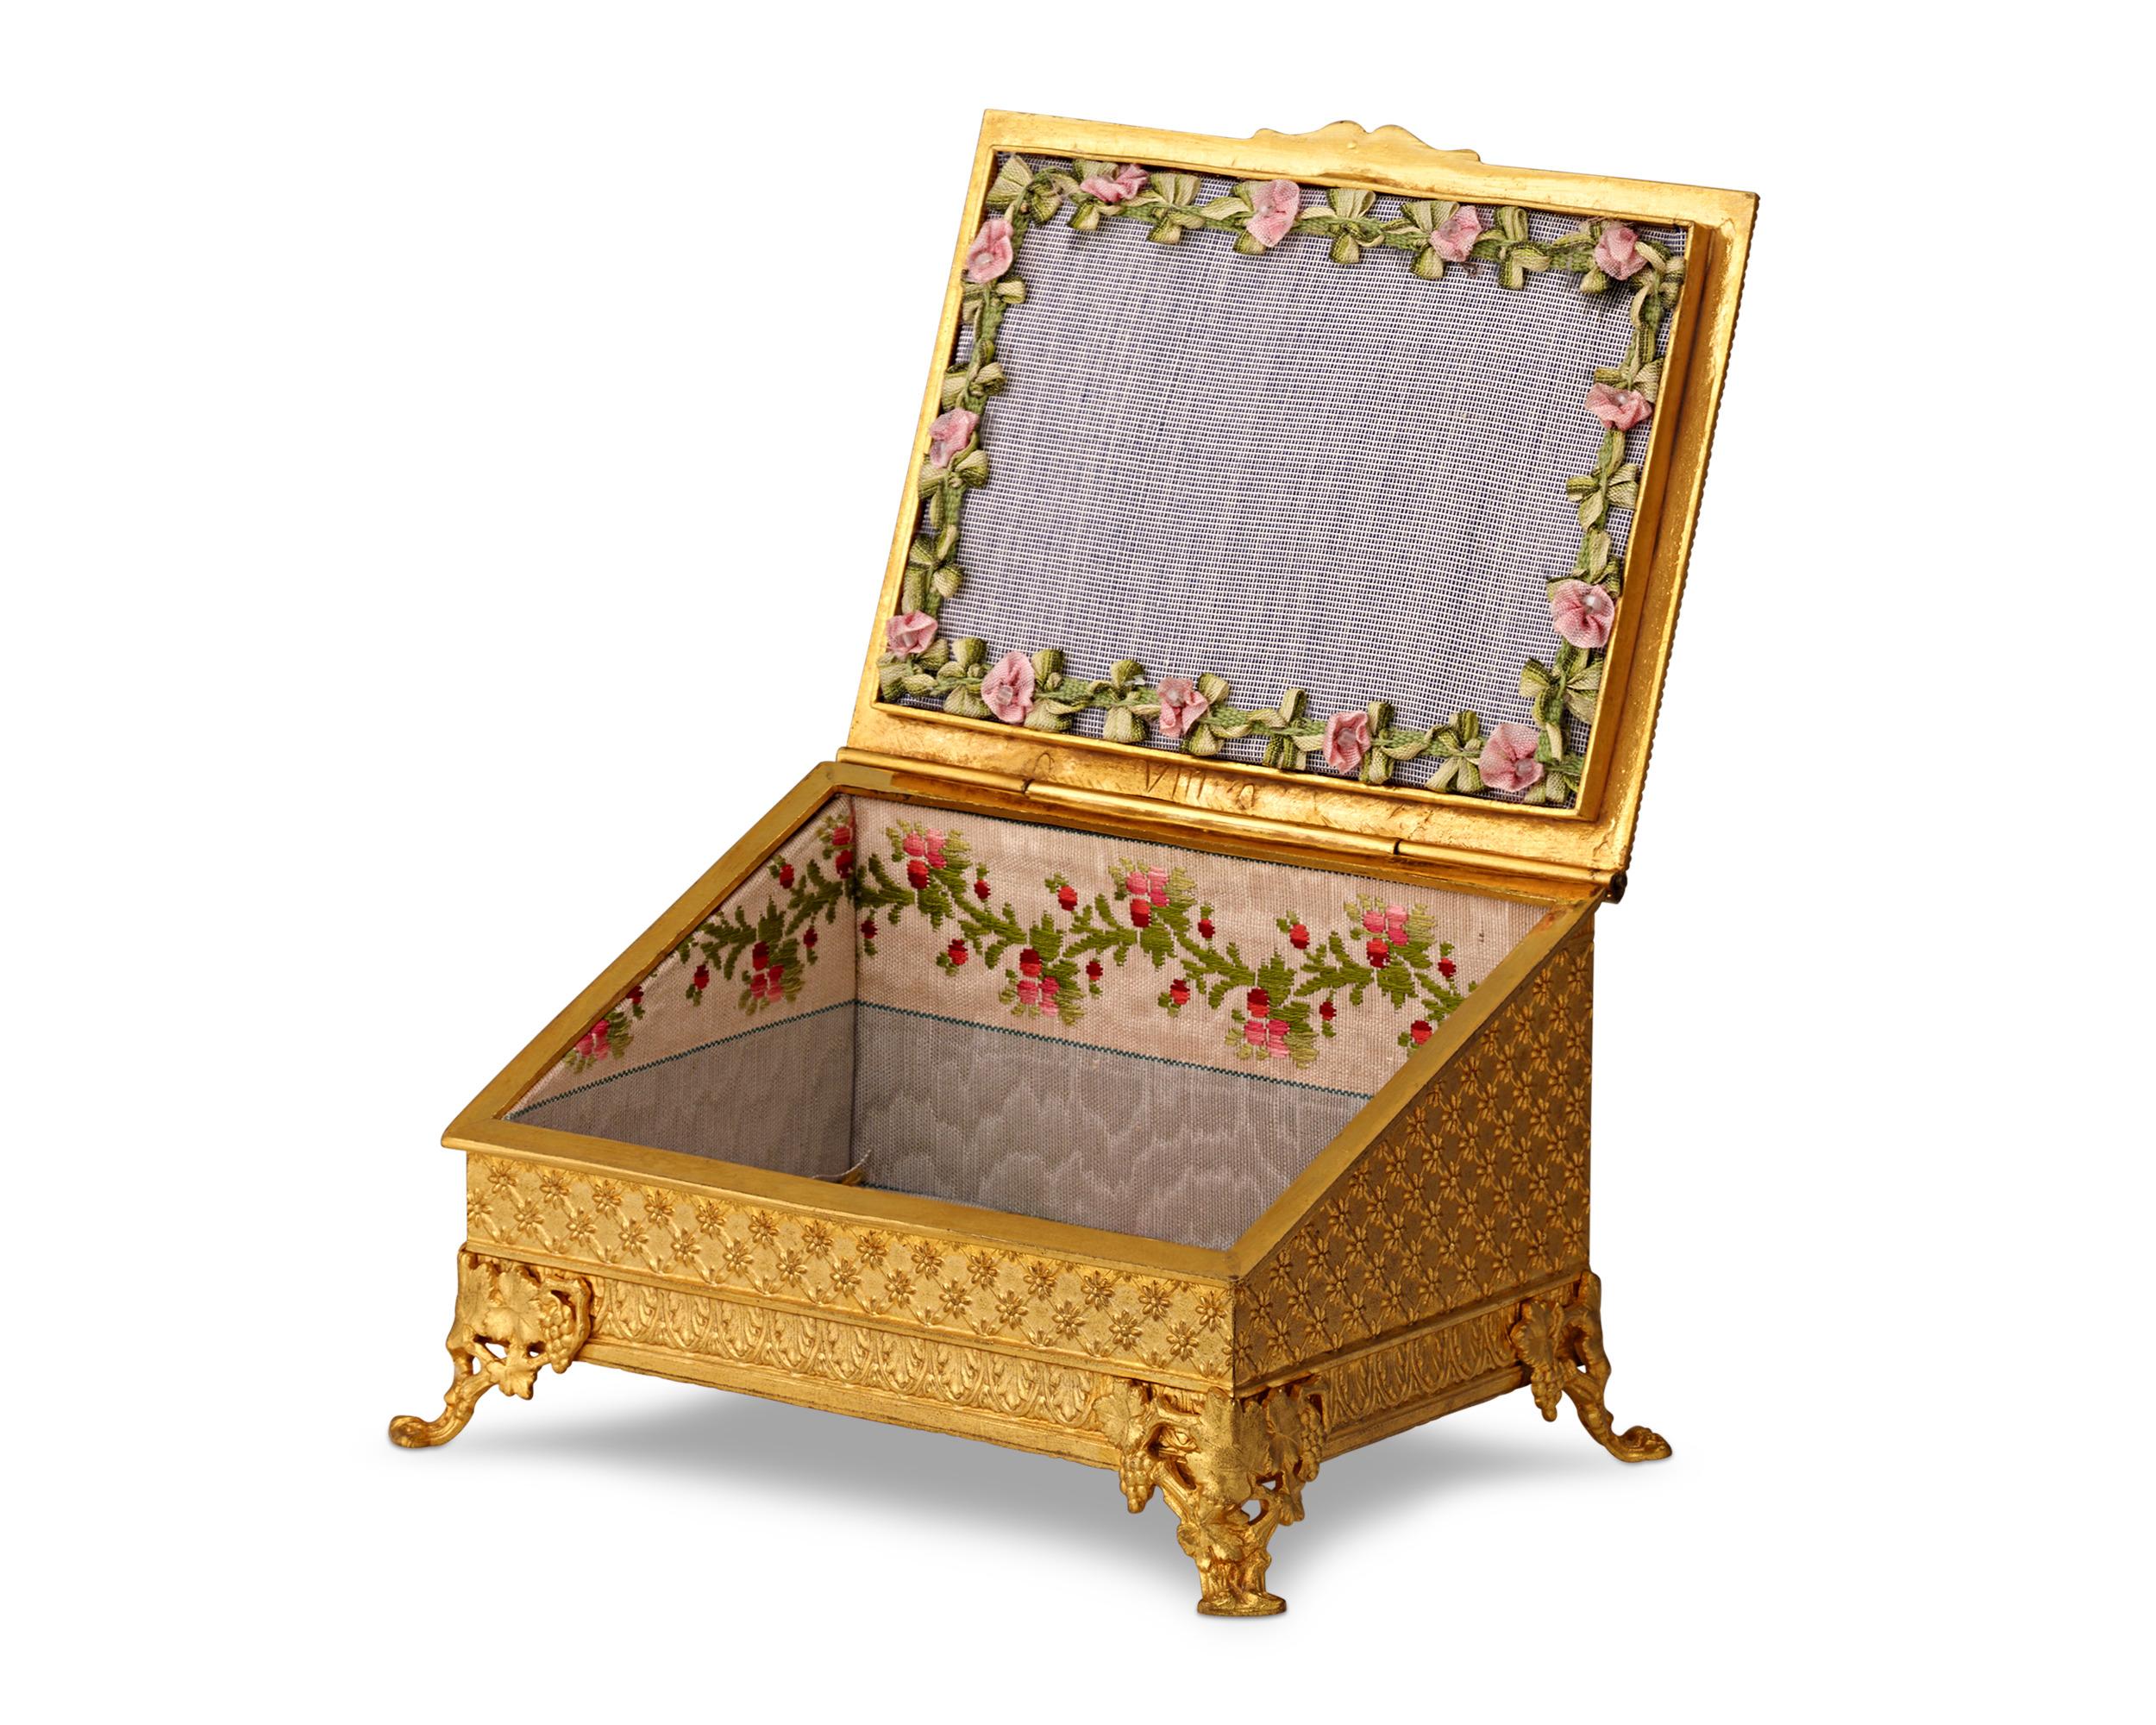 This exquisite French writing desk casket is a stellar example of neoclassical craftsmanship. Fashioned from Doré bronze and adorned with royal blue enamel, it features a classical tableau intricately carved to showcase ancient aesthetics. The